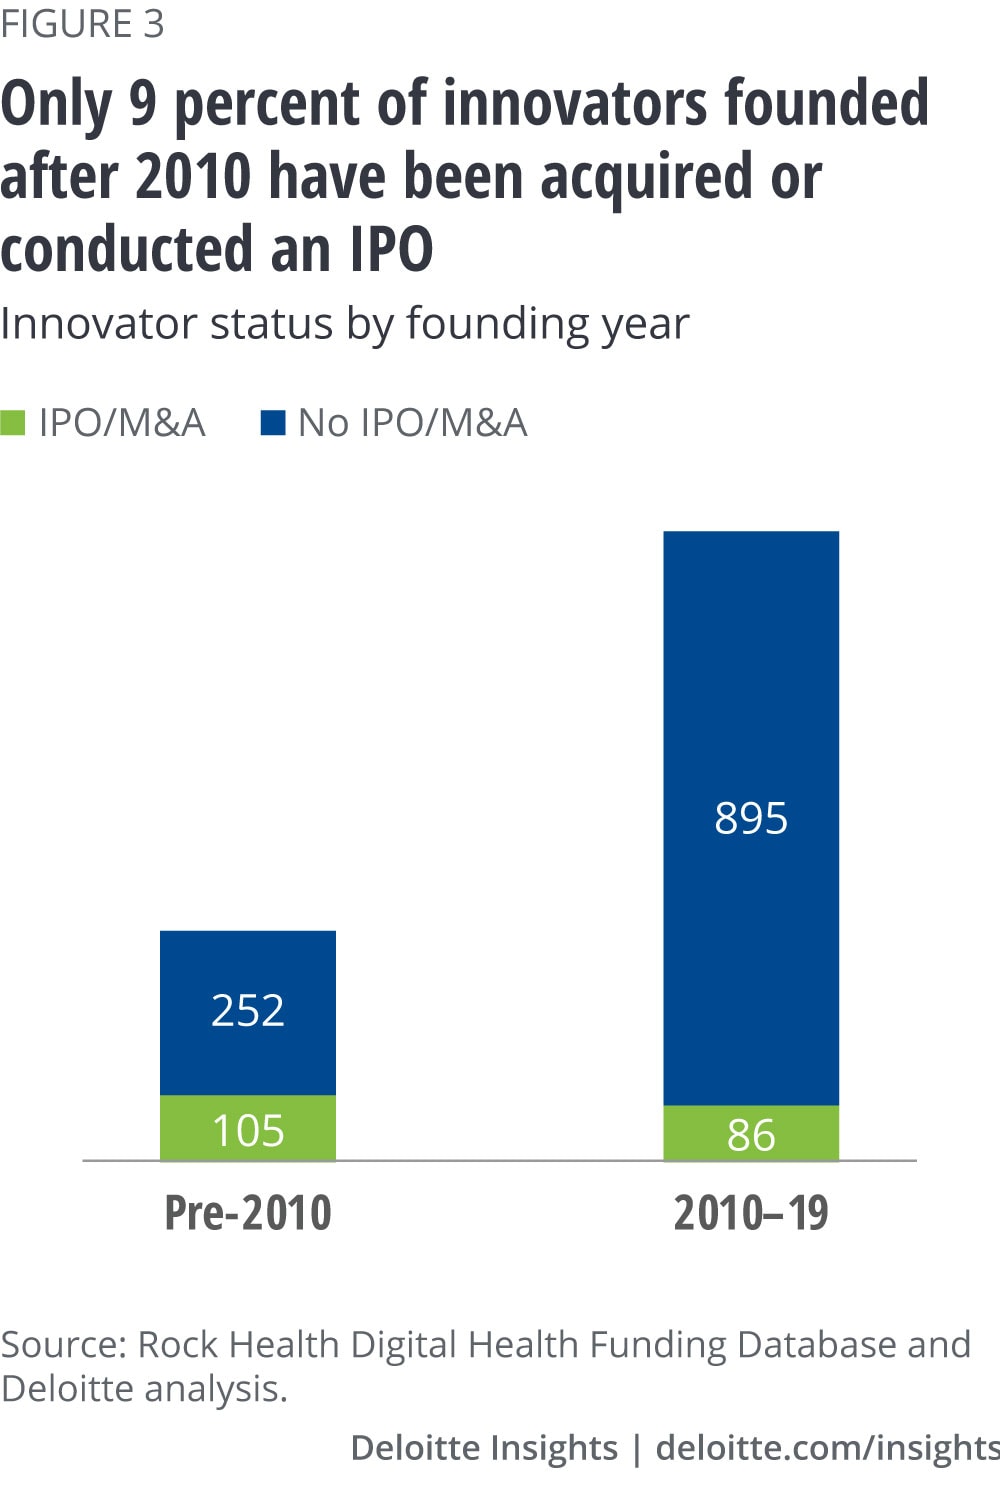 Only 10 percent of startups founded after 2010 have been acquired or conducted an IPO